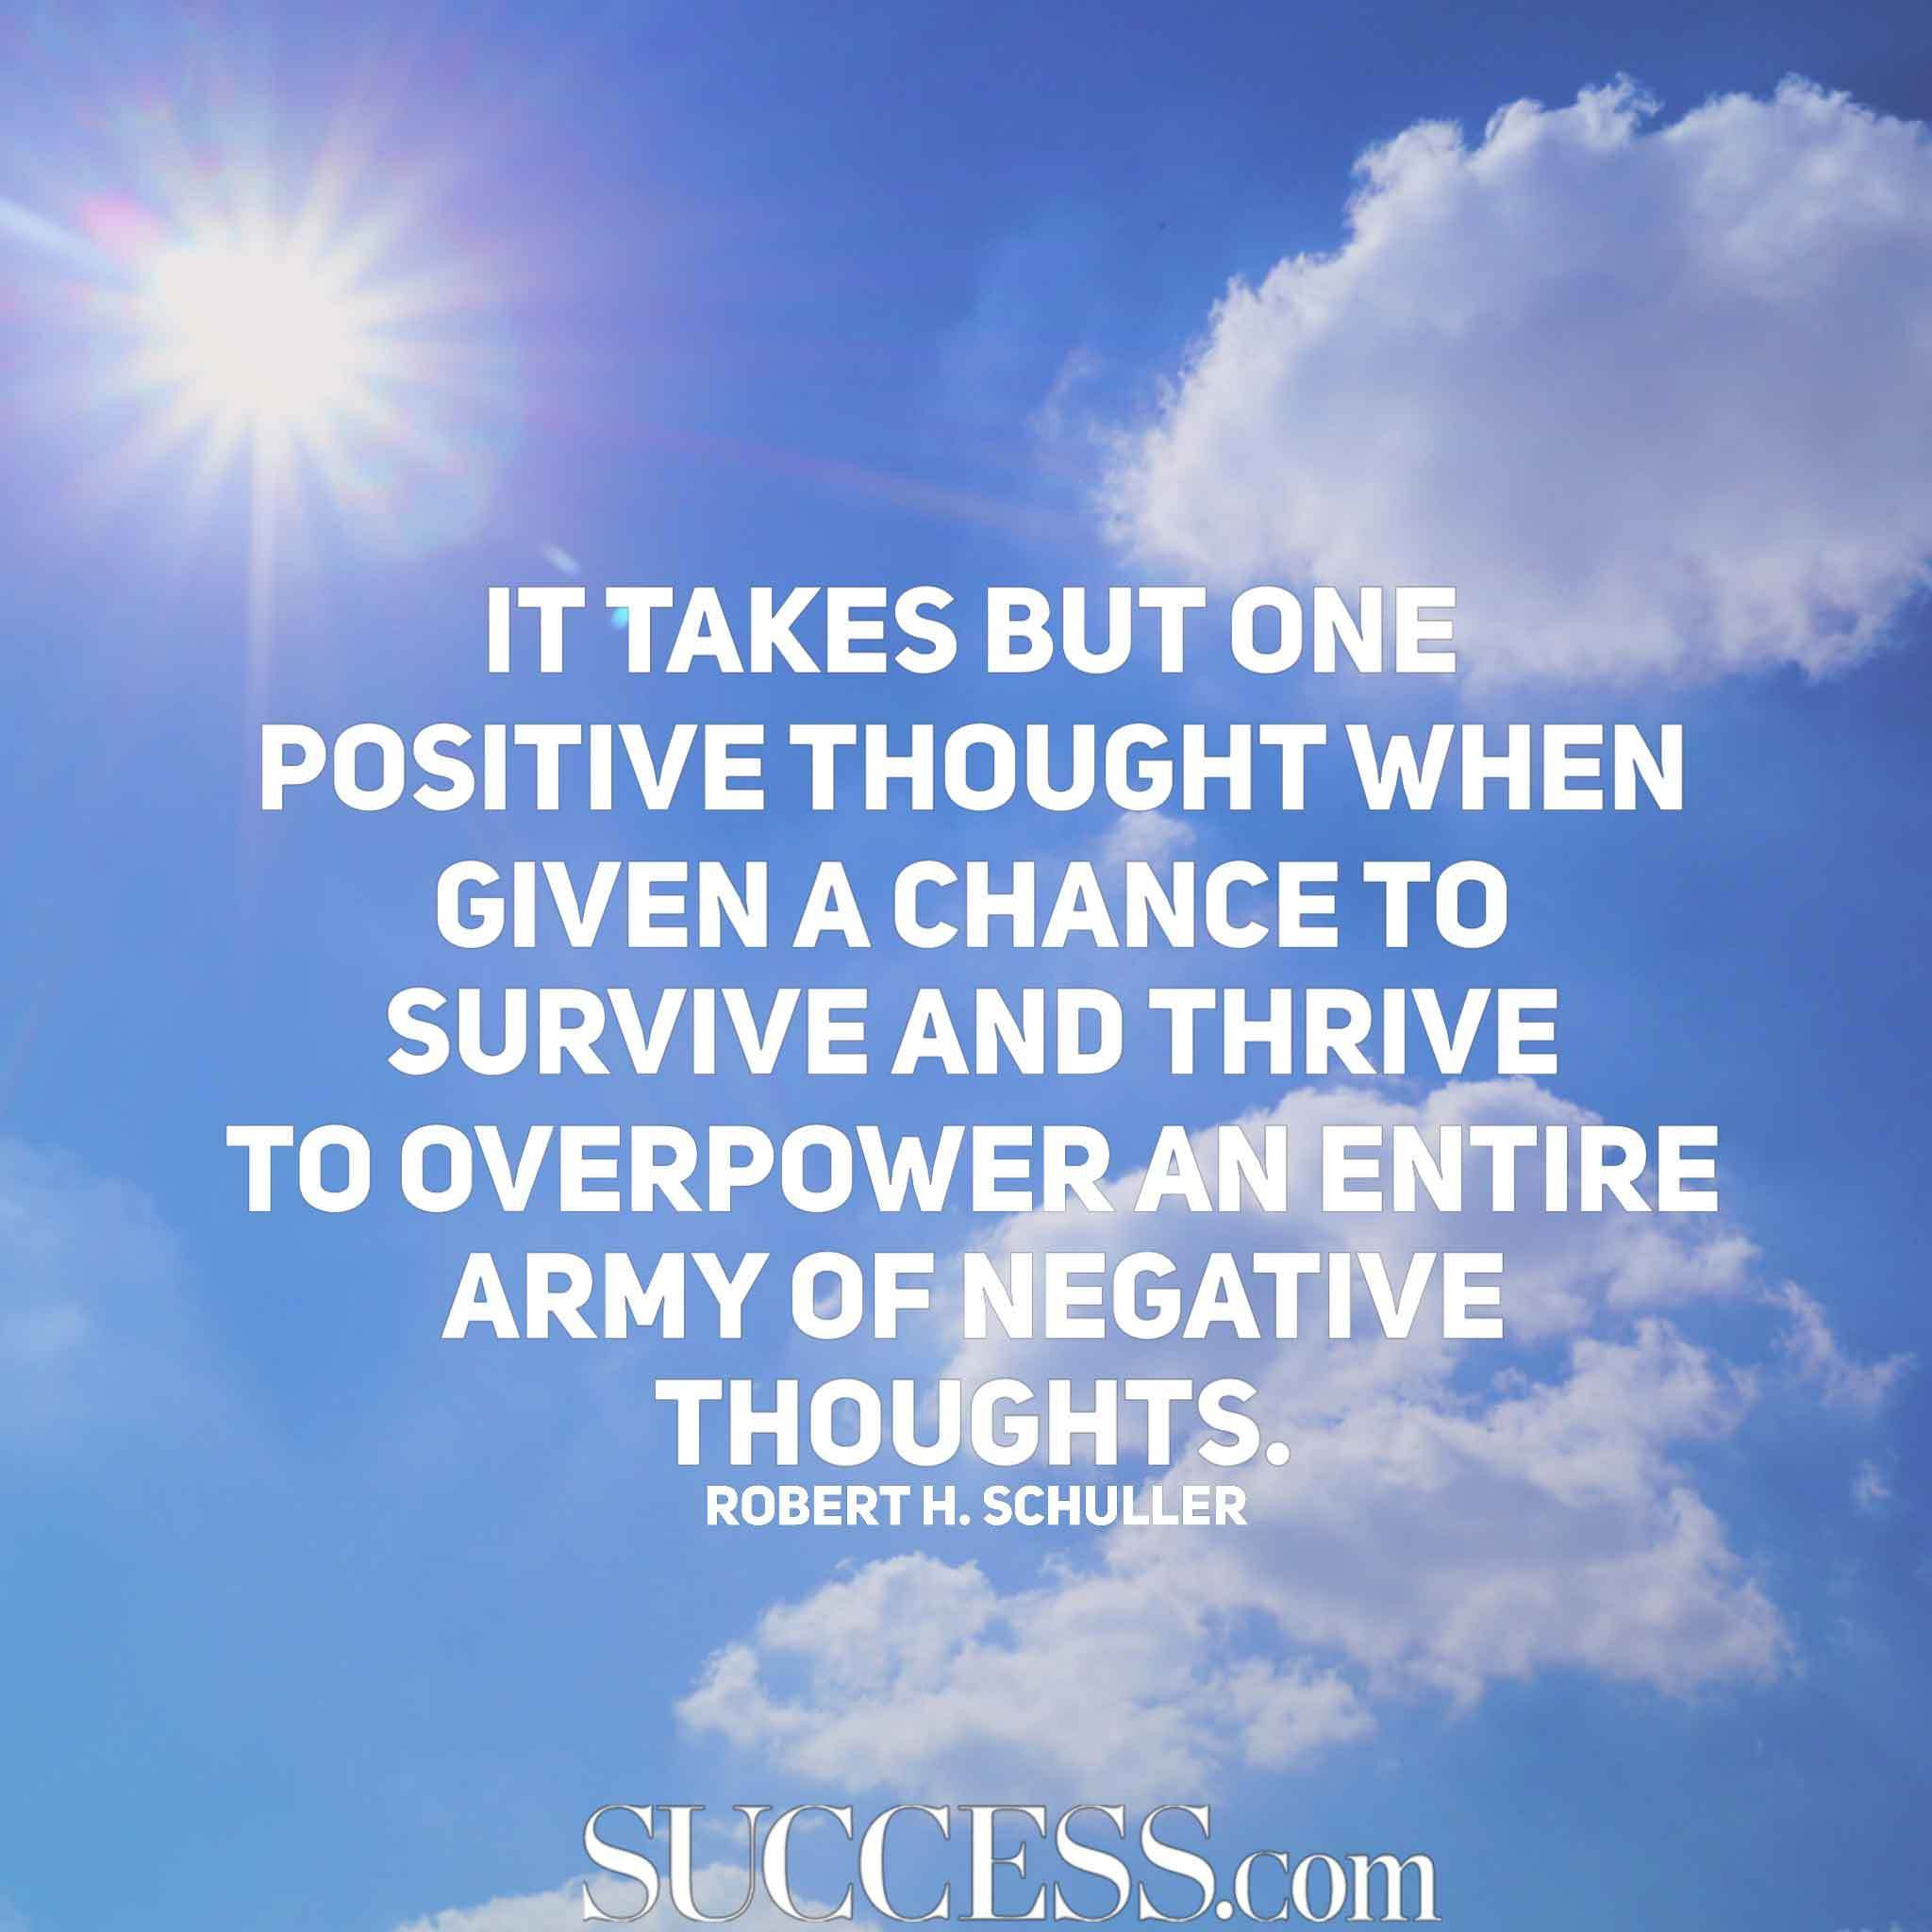 Life Positiveness Quotes
 13 Quotes for a Positive Life